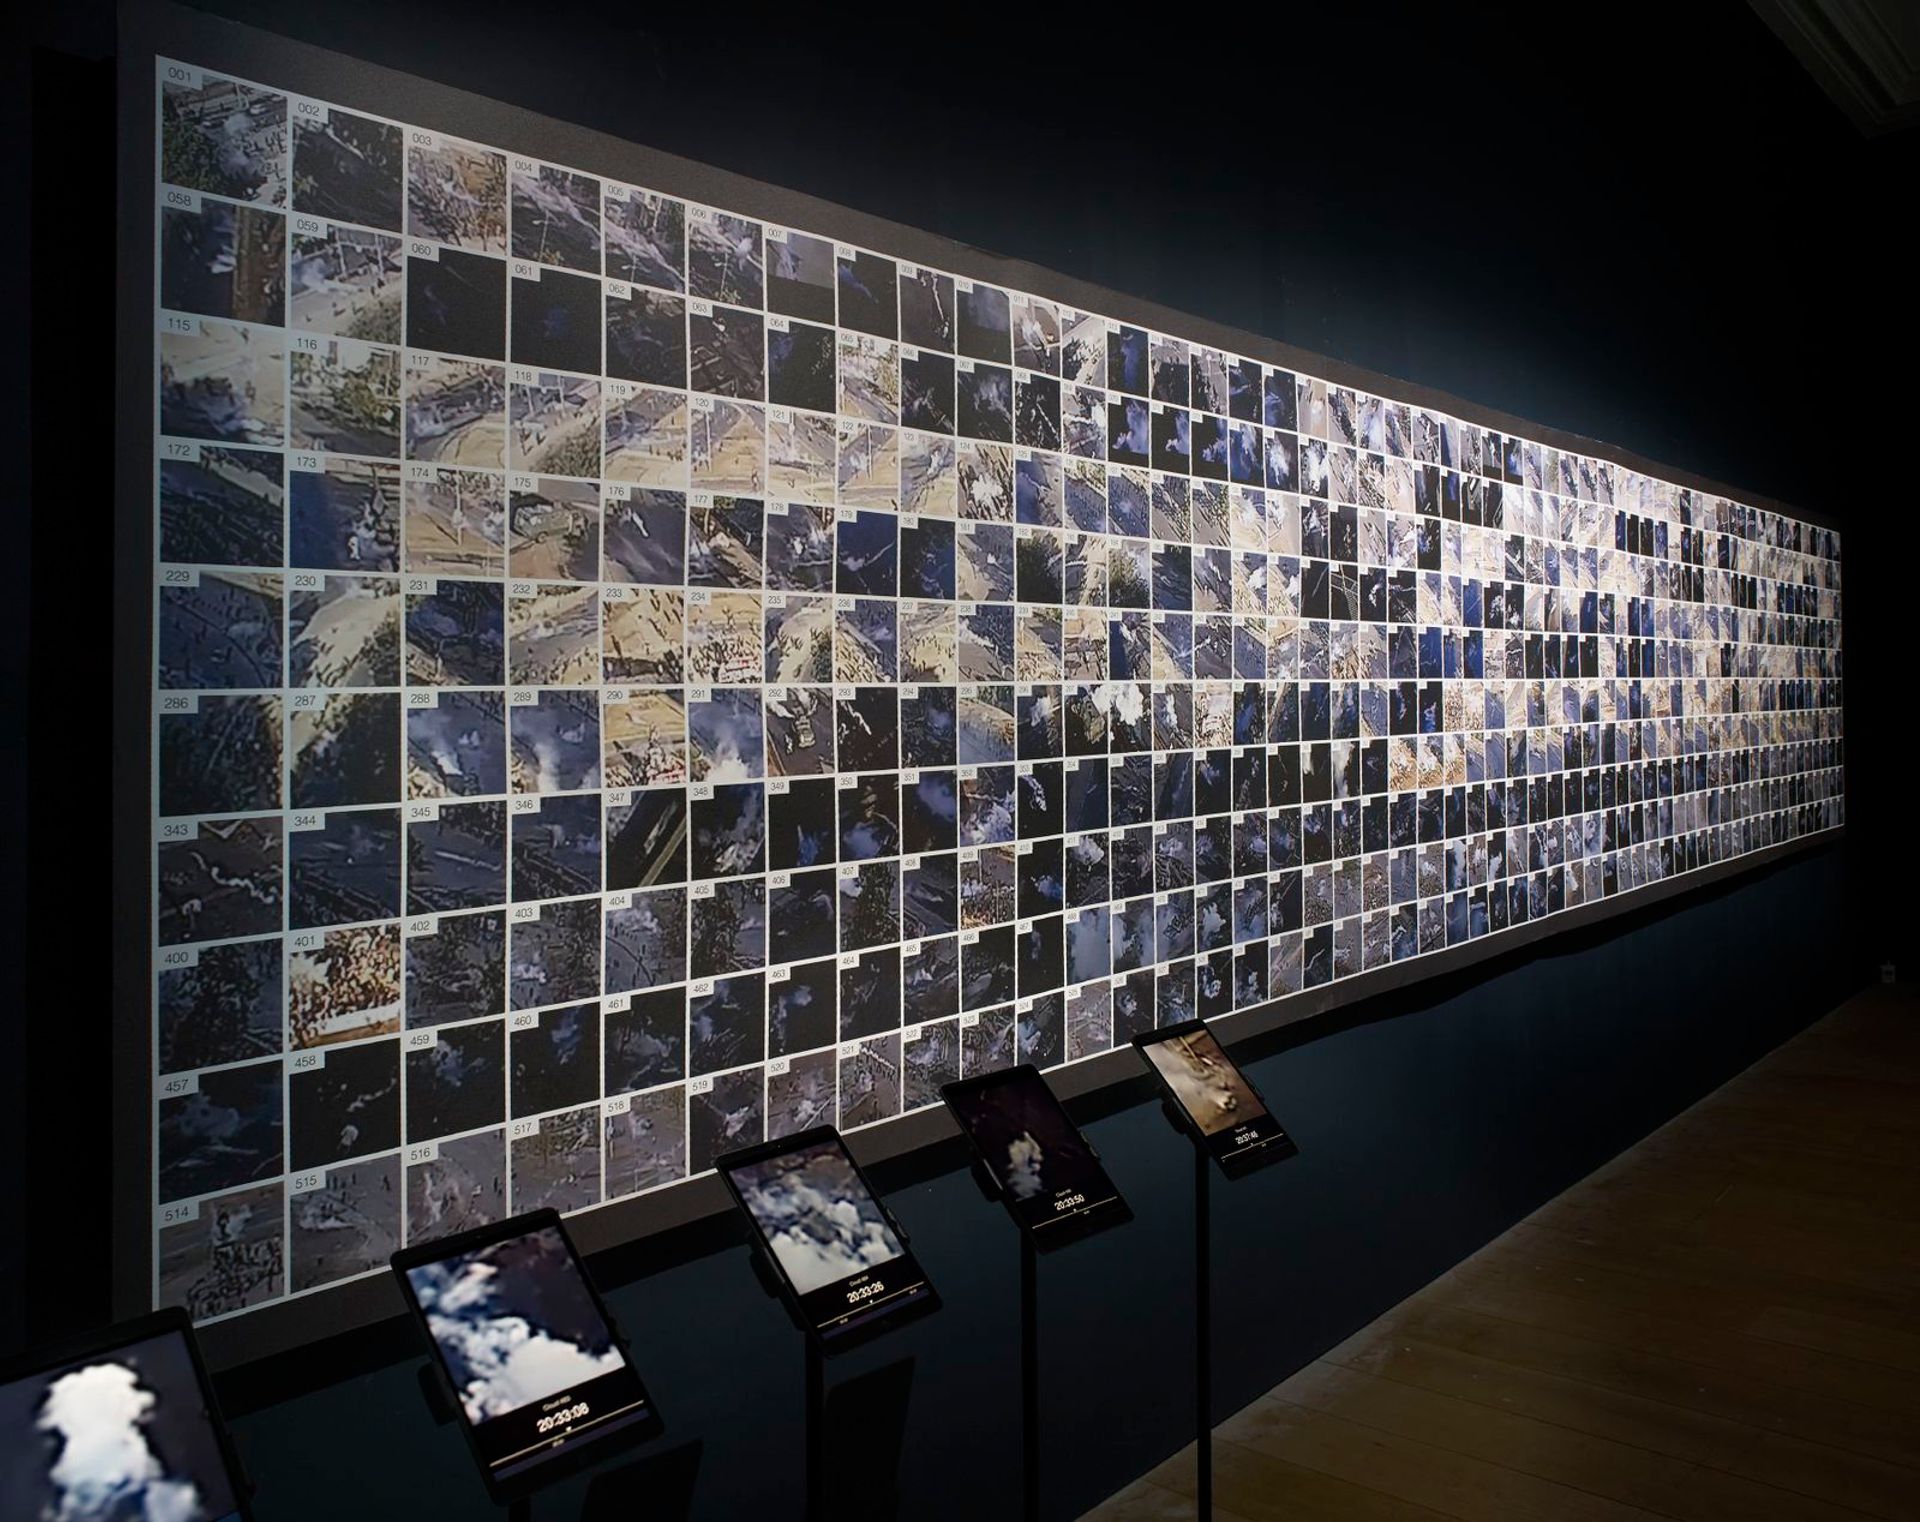 Installation view of Cloud Studies at Whitworth Gallery, Manchester Image: Courtesy of Forensic Architecture and Whitworth Art Gallery, University of Manchester